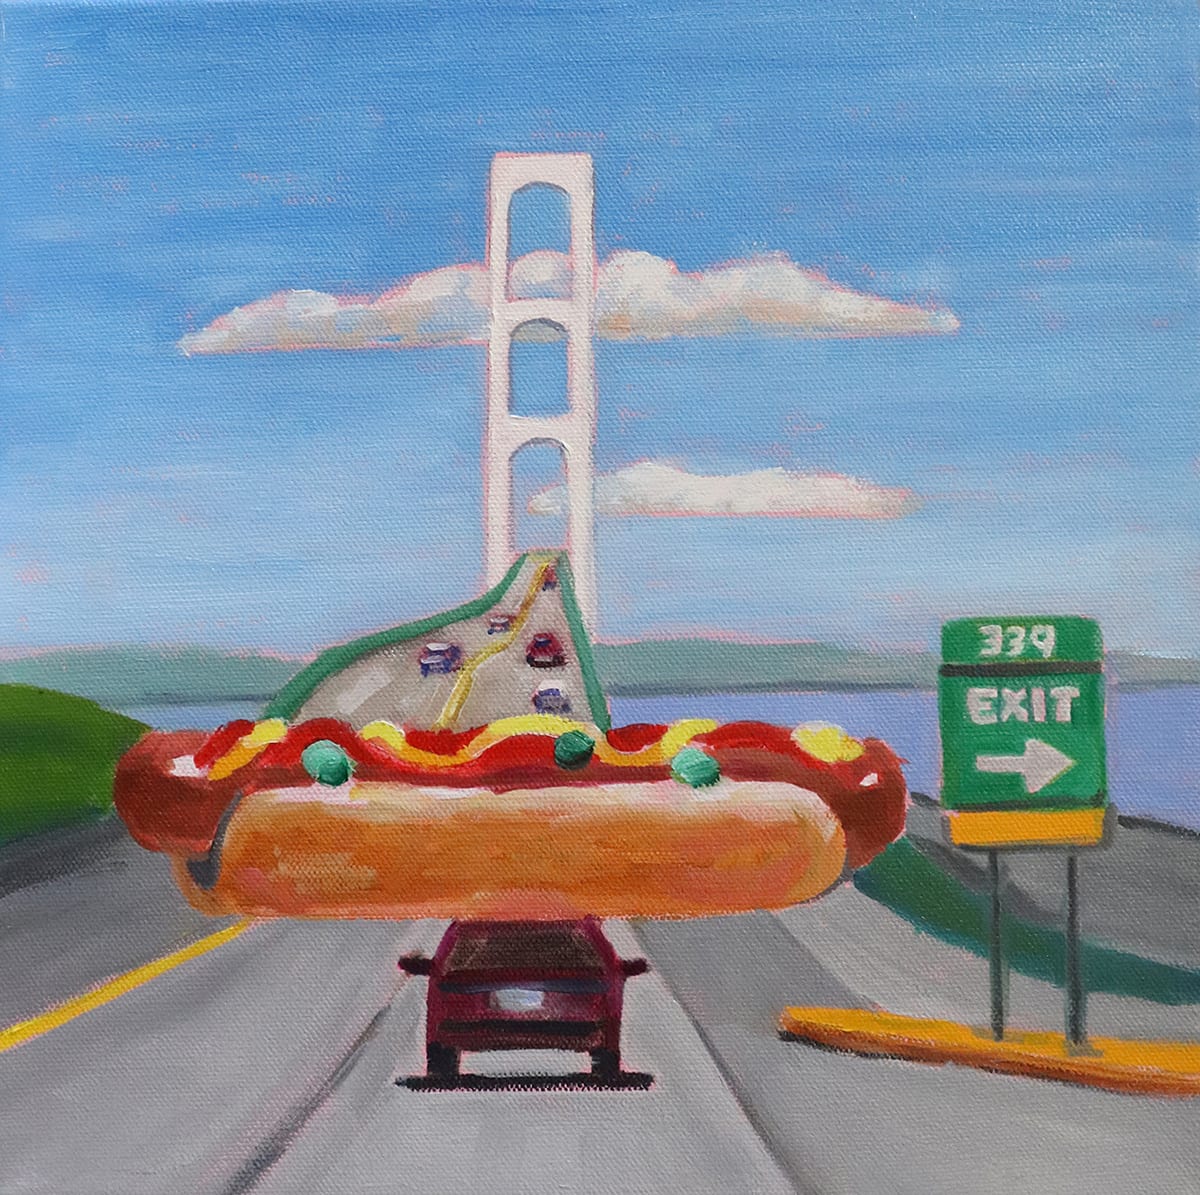 Exit 339 by Judy Kelly  Image: On the ramp leading to the Mackinaw Bridge, I was struck by the juxtaposition of the nearby super-sized horizontal Weinerlicious hot dog sign and the vertical towers of the Mighty Mac.  My whimsical interpretation leads to a bevy of questions.  Will the dog snag on the tower while going through?  Will the Weinermobile become airborne lifted by the notorious strait winds?  Is the car a pastie introducing the hot dog to the UP?  You are invited into the scene to speculate on the fate of this Dog and Car story.
Winner of Merit Award at the Food Is Art/Art Is Food Exhibition, Glen Arbor Arts Center, May 2021.